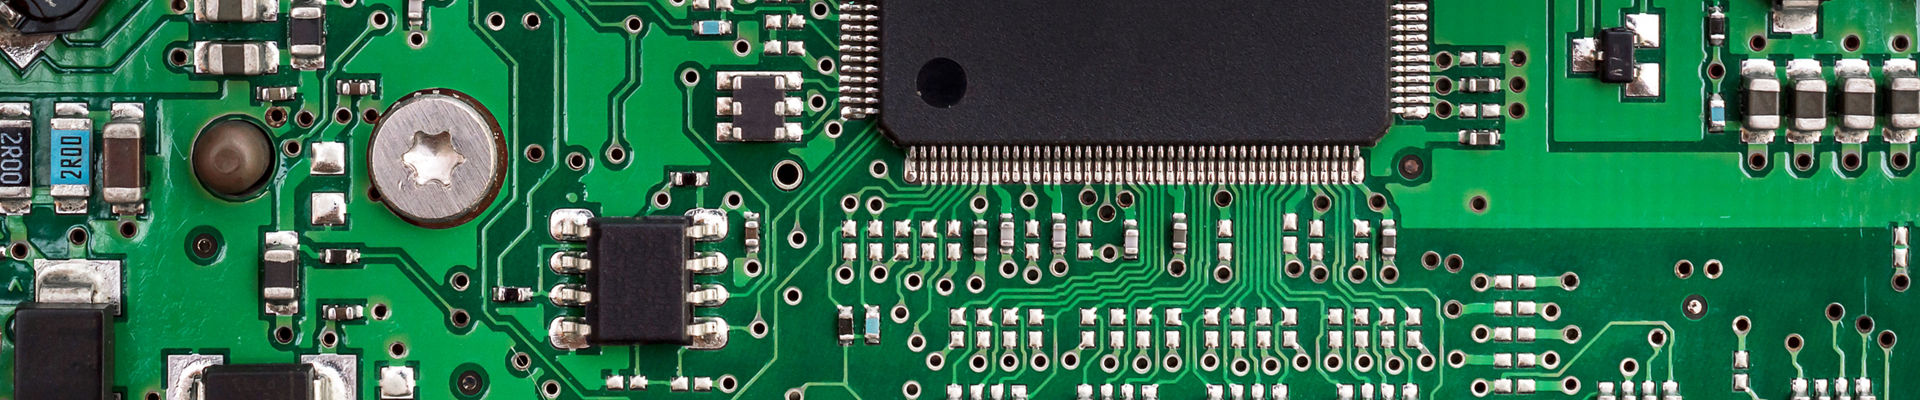 Close-Up image of circuit board and its components